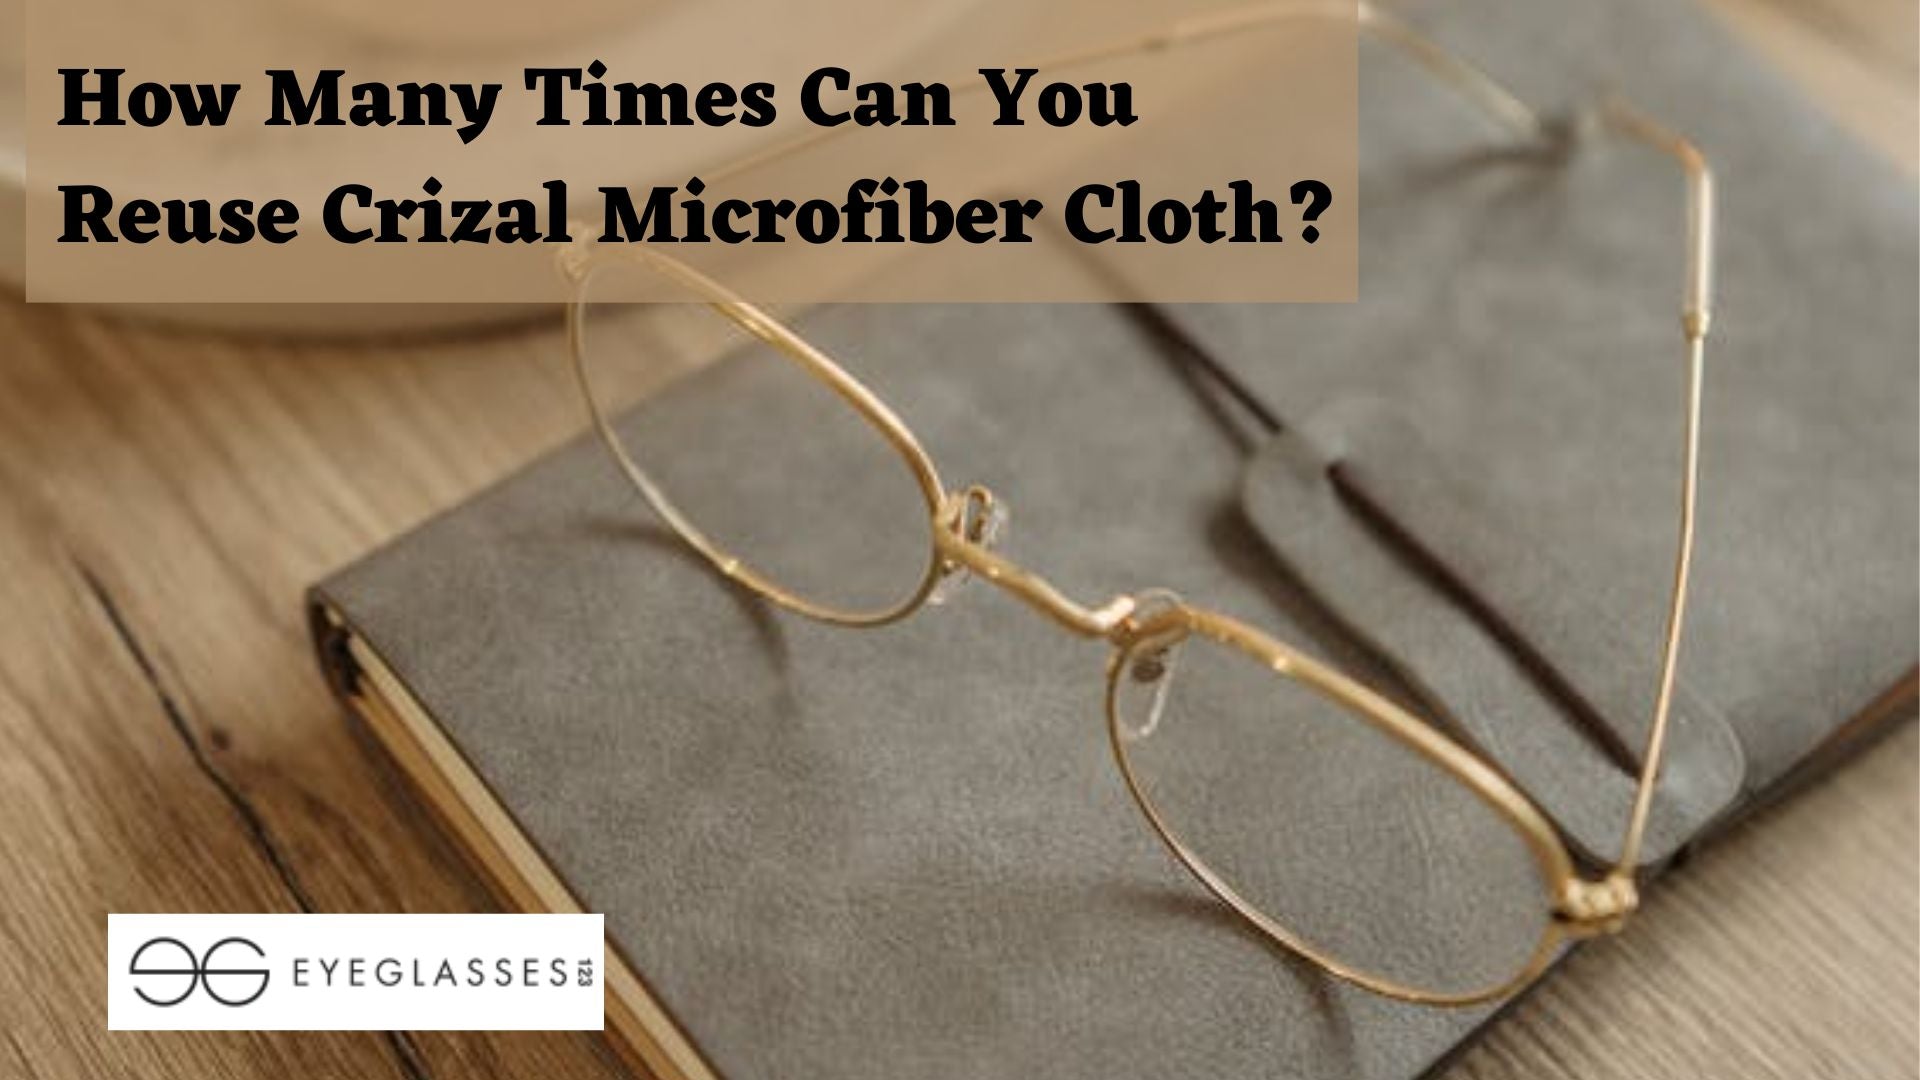 How Many Times Can You Reuse Crizal Microfiber Cloth?